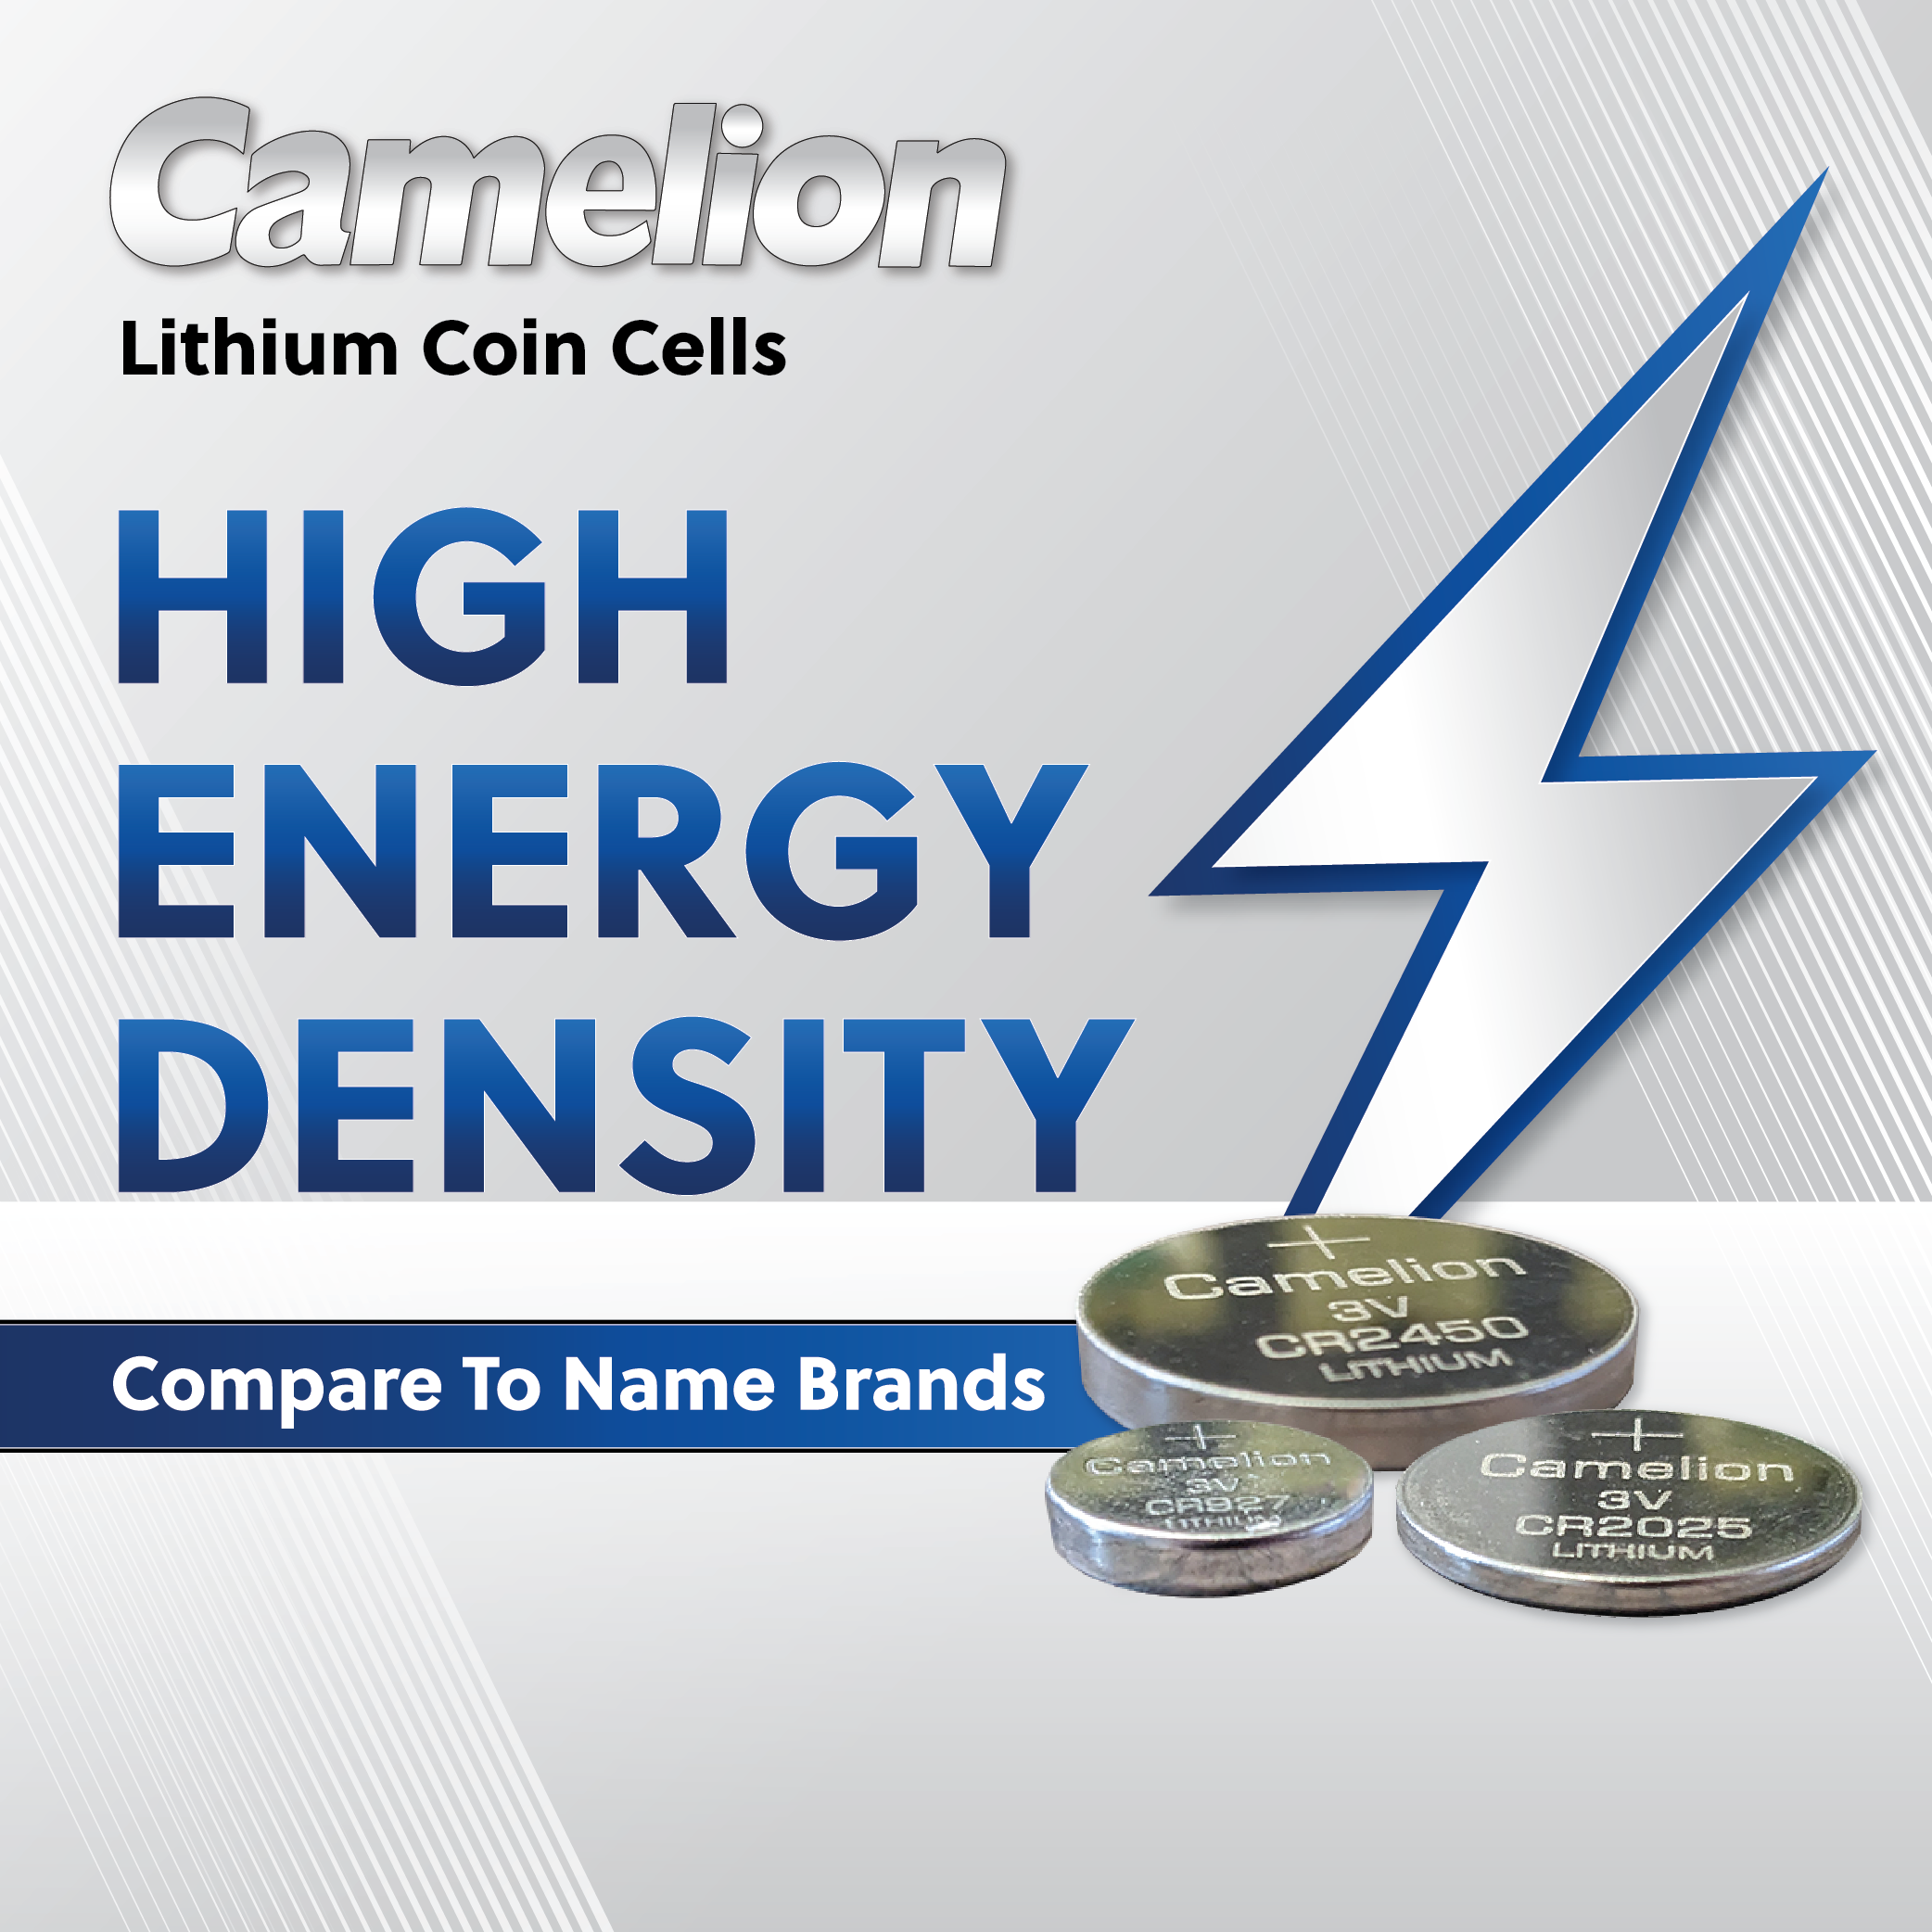 Camelion CR2032 3V Lithium Coin Cell Battery